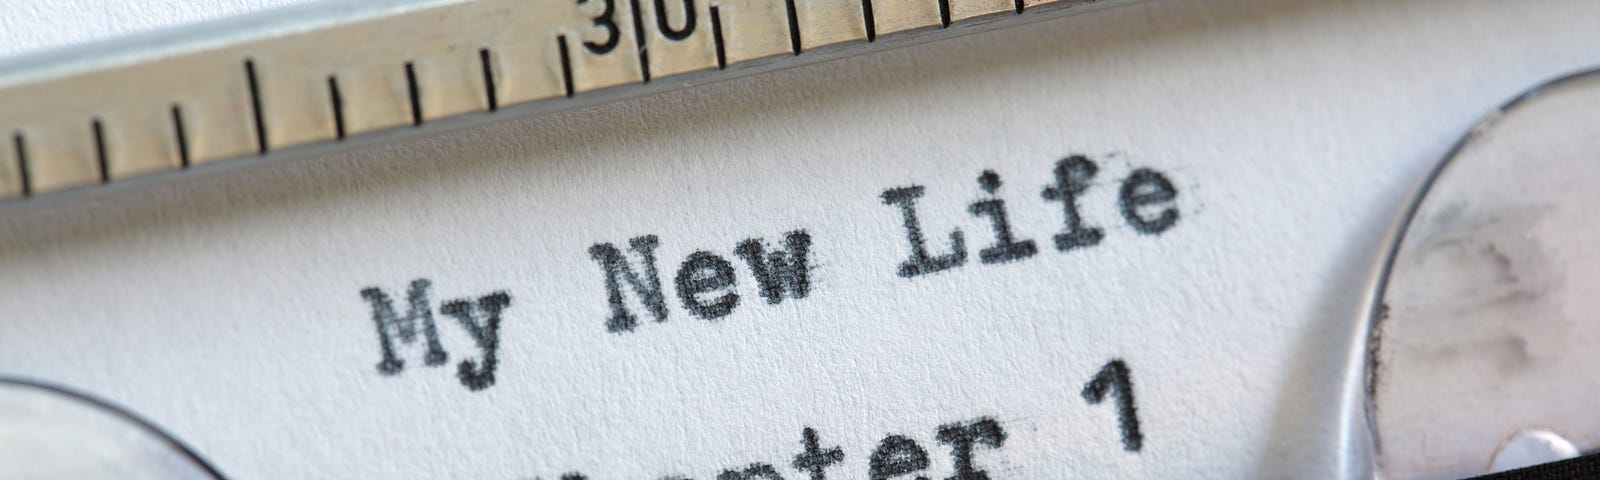 A typewriter with a piece of paper in it that has “My New Life Chapter 1” typed on it